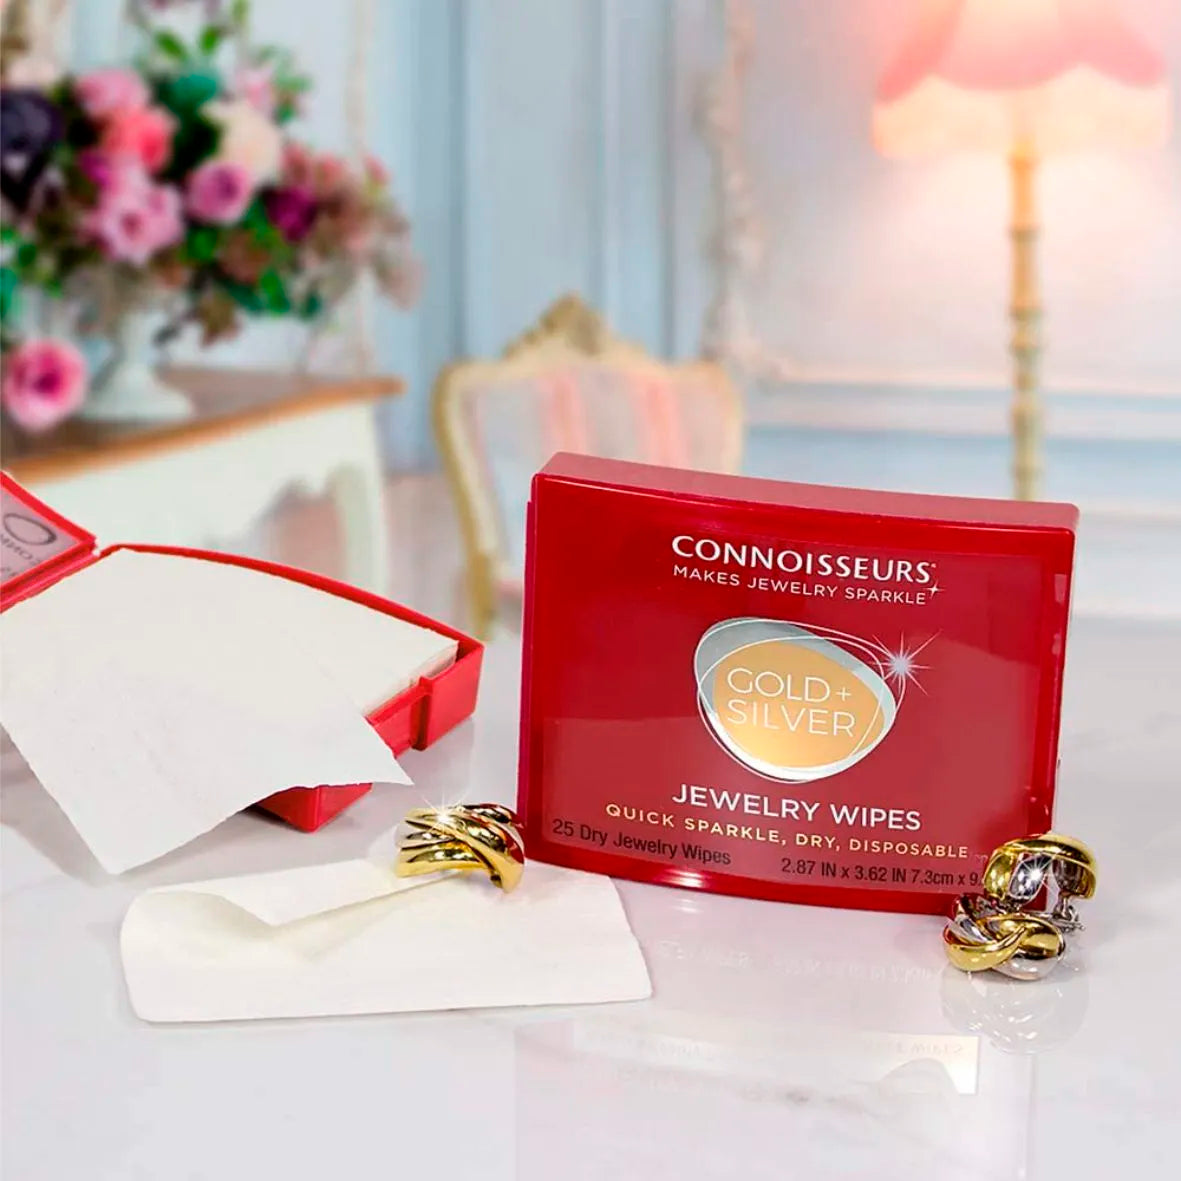 Connoisseurs Jewelry Wipes Gold Silver Platinum Diamond Gemstone Excellent For Watches Cleaning Care maintenance